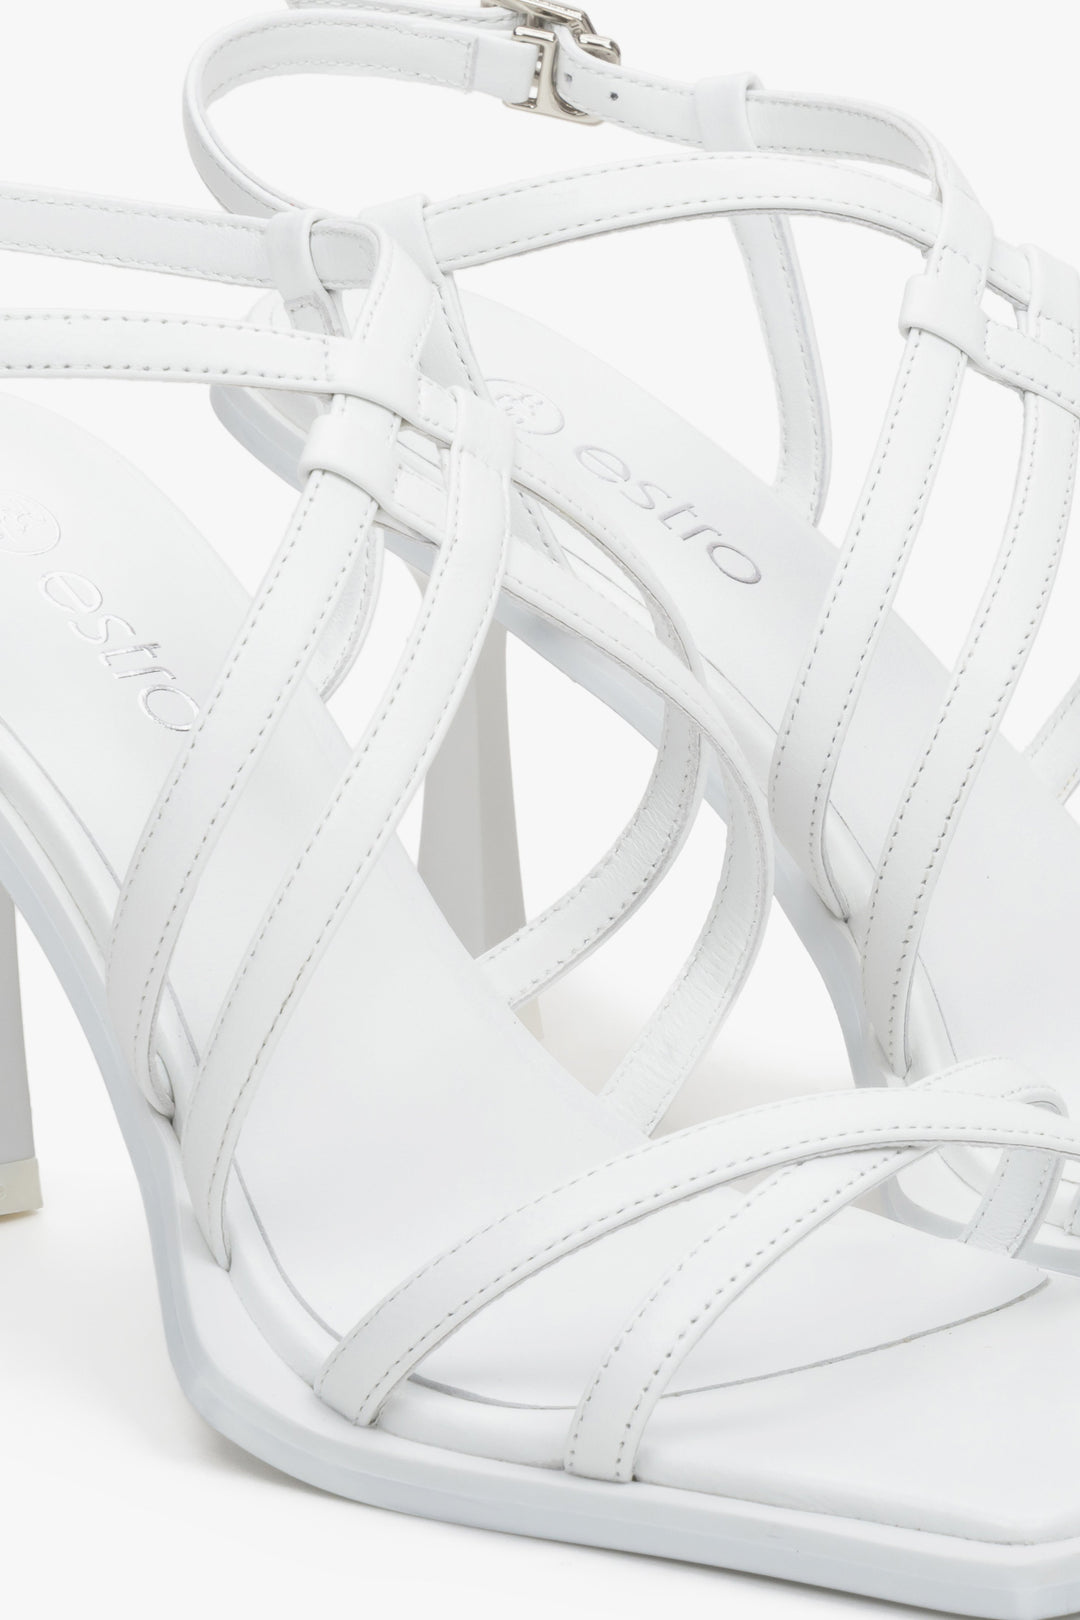 Women's strappy white sandals with a funnel heel - close-up on details.